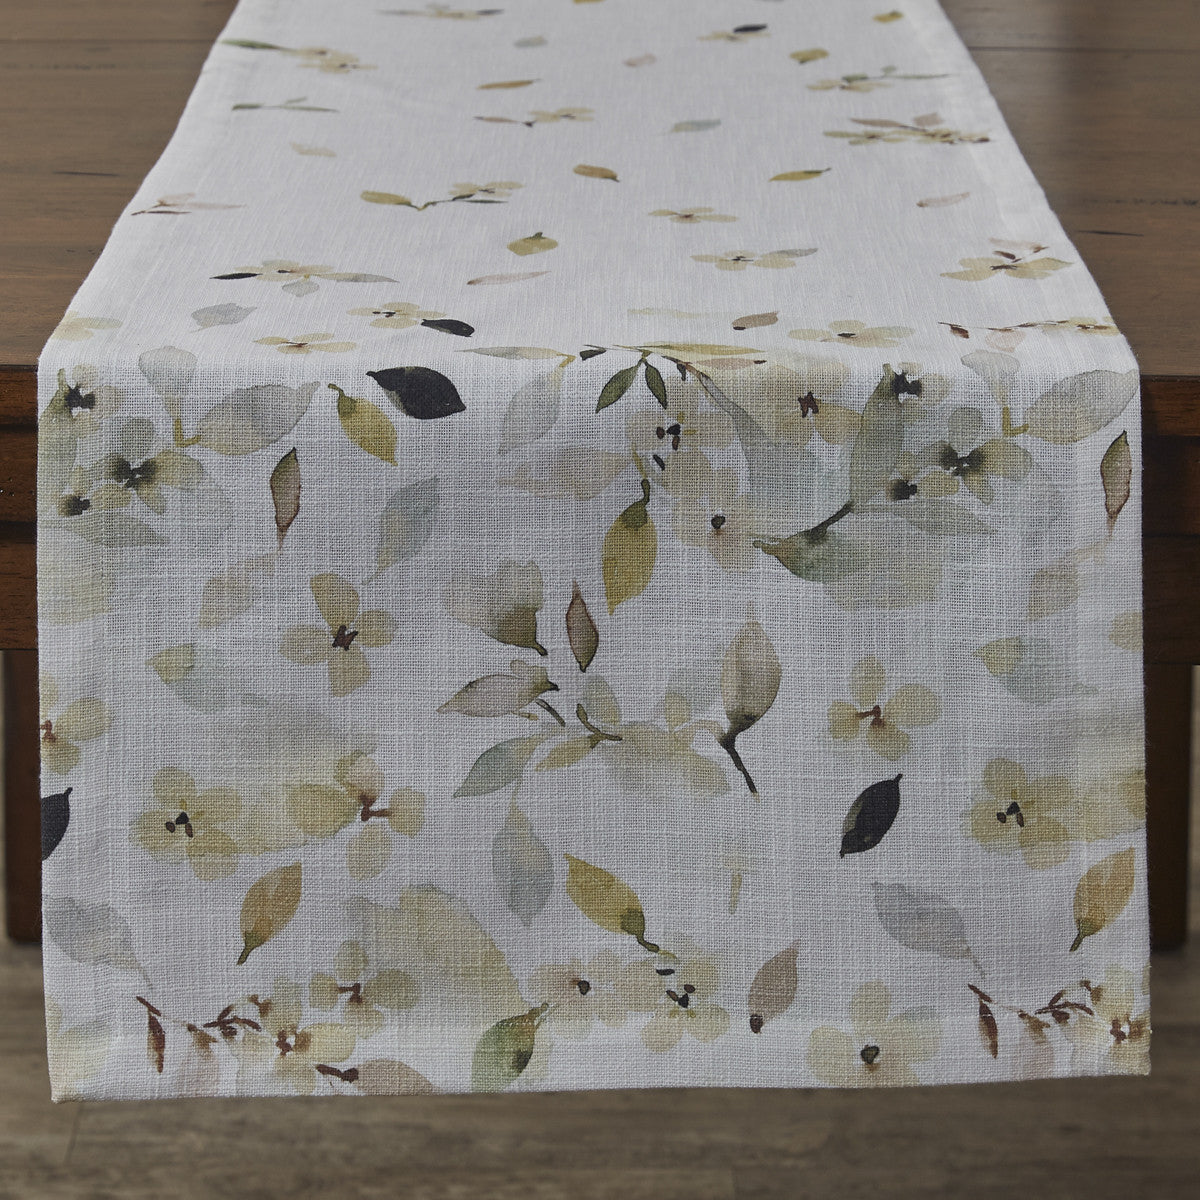 Patience Floral Printed Table Runner - 72"L Park Designs